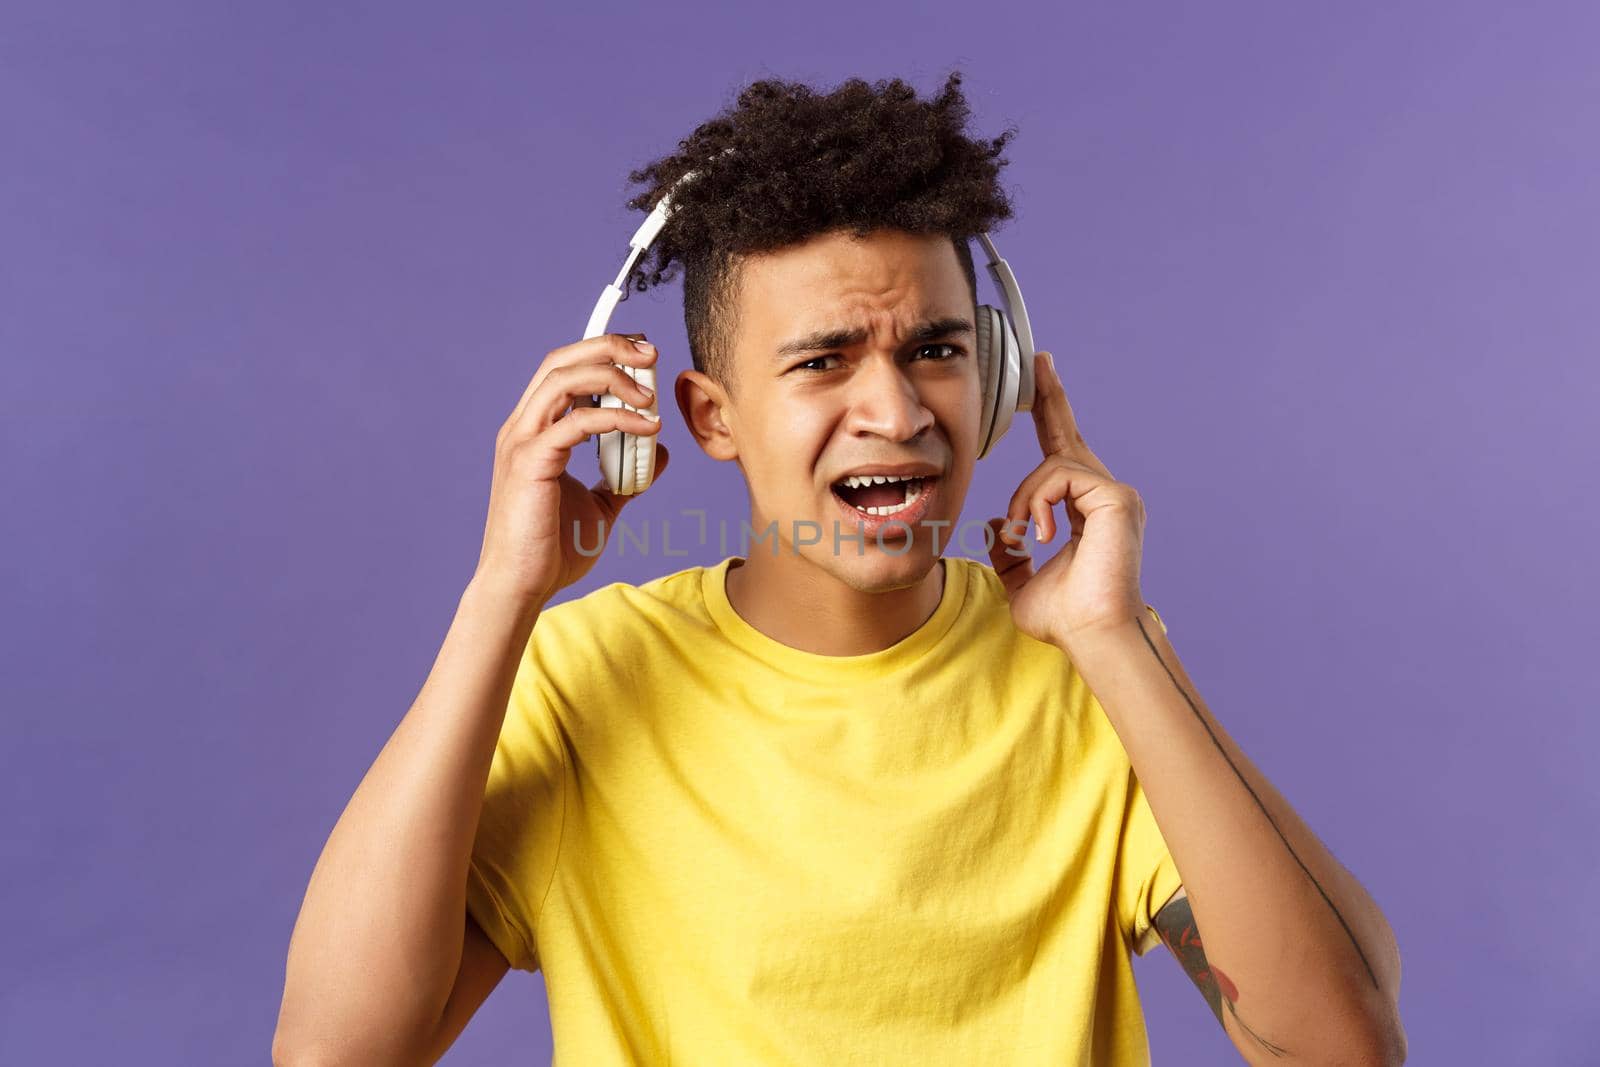 Cant hear you, repeat please. Portrait of young bothered guy interrupted of listening music, take-off headphones to answer person question, squinting look confused, purple background.